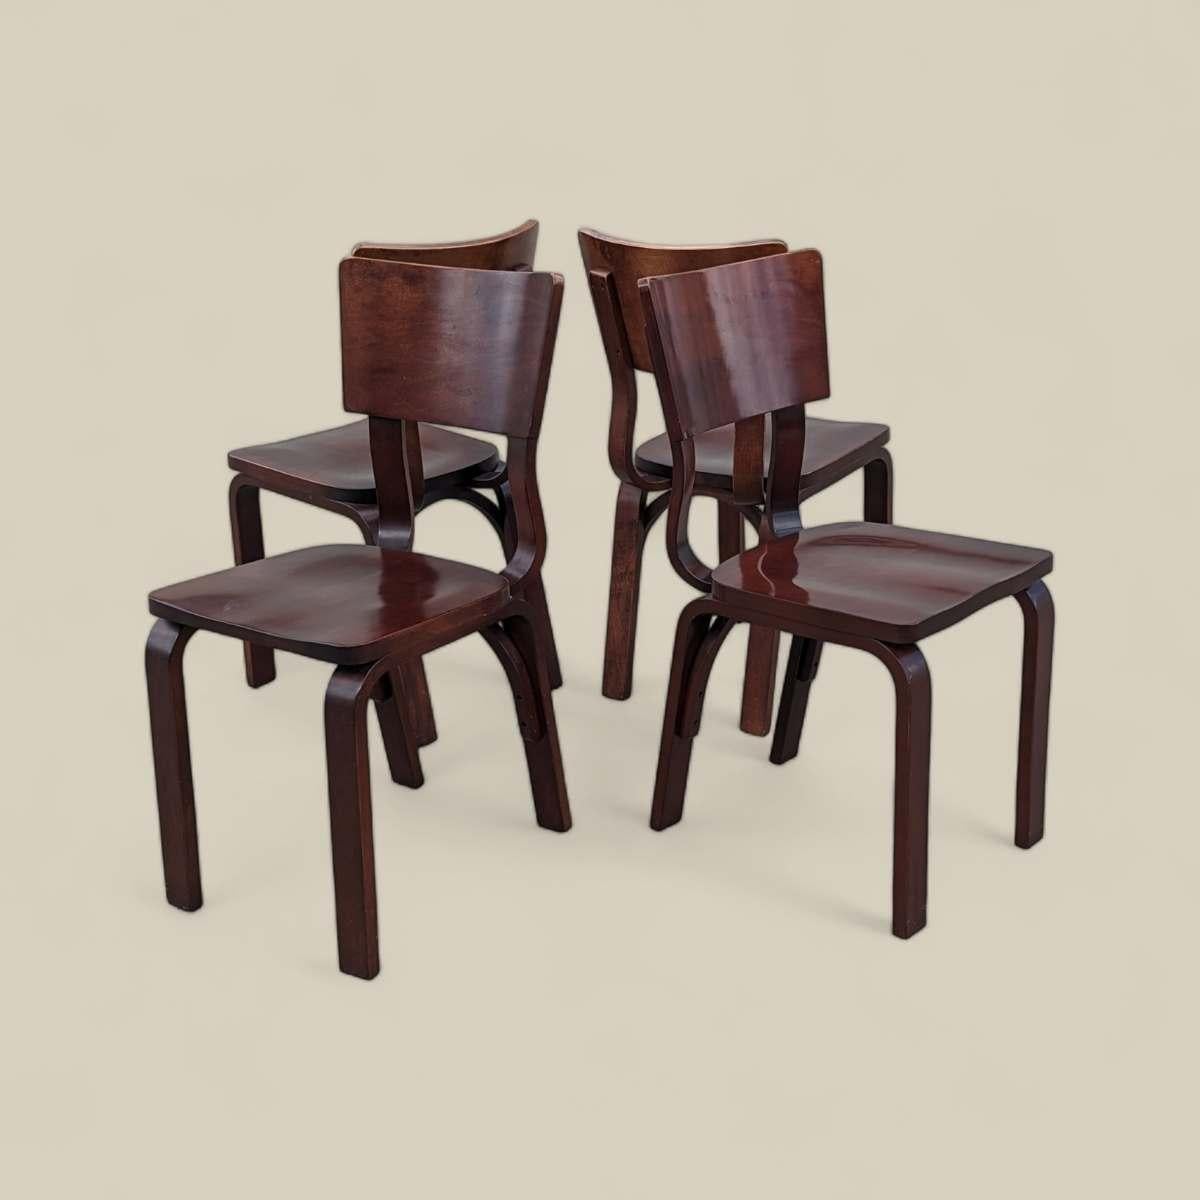 Vintage Thonet Bentwood Dining Chairs - Set of 4 

Late-20th century bentwood dining chairs by Thonet, the renowned maker of bent beechwood furniture. Featuring Thonet's signature curved frames handcrafted from solid beechwood with a rich